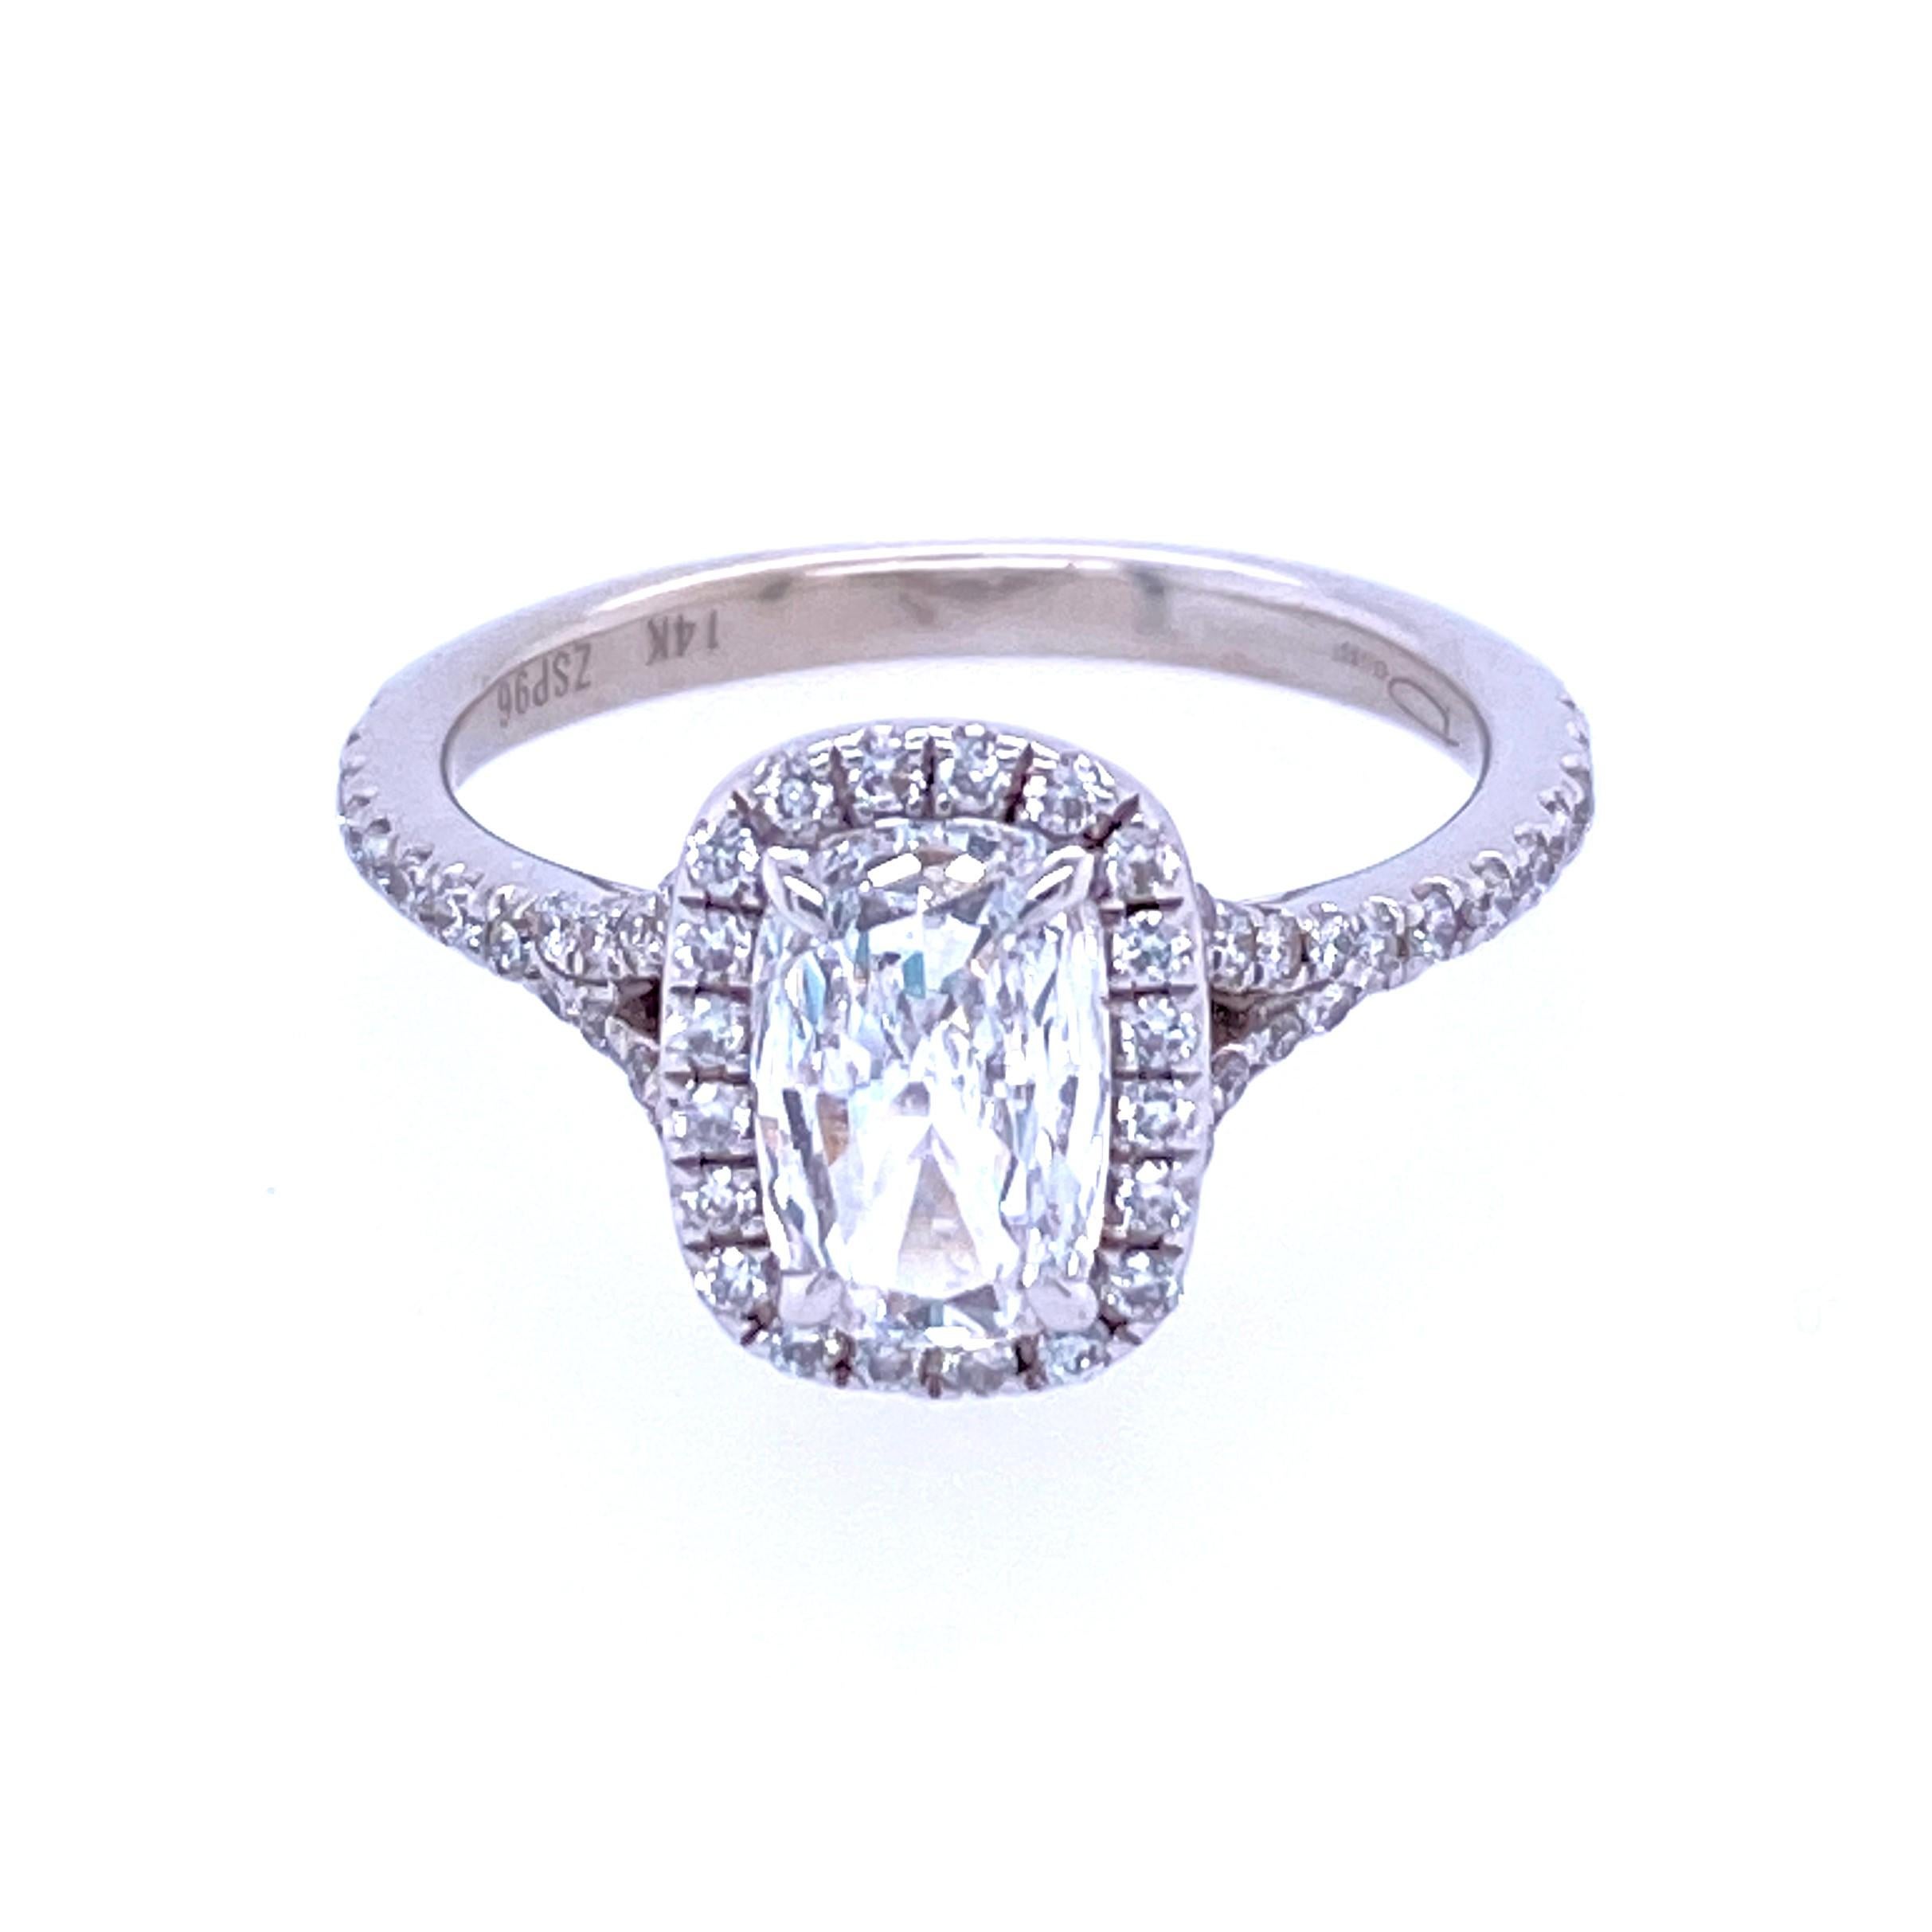 One 14 karat white gold diamond contemporary wedding set featuring one 14 karat white gold (stamped 14K ZSP96) 0.82 carat cushion cut diamond with H color and SI1 clarity set in a halo style setting with 0.28 carat total weight of round brilliant